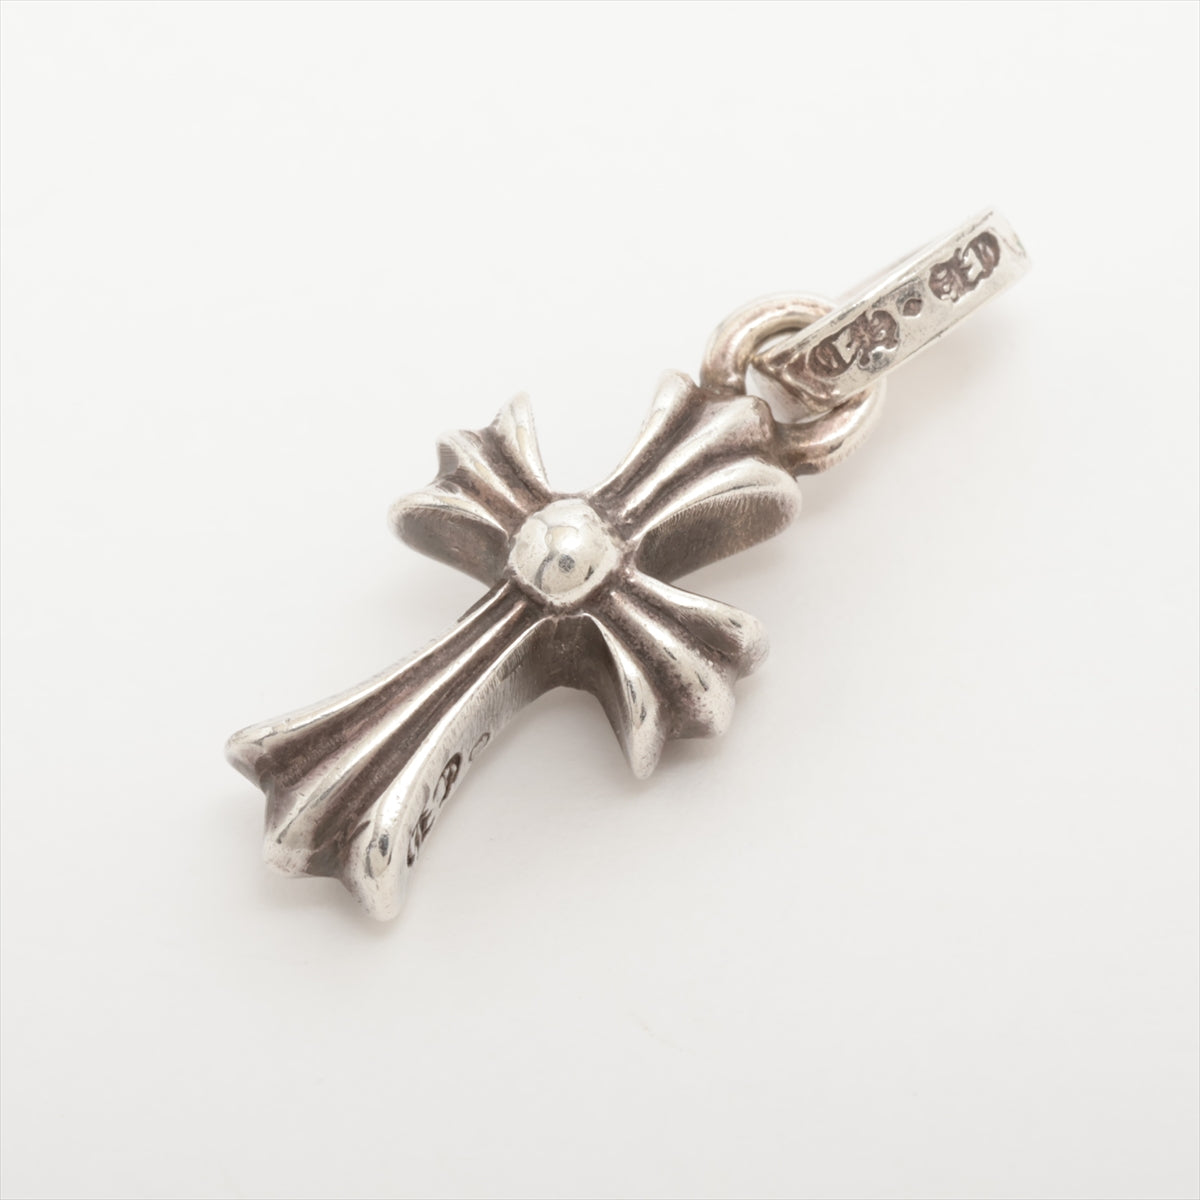 Chrome Hearts CH Cross Baby fat charms Pendant top 925 2.4g